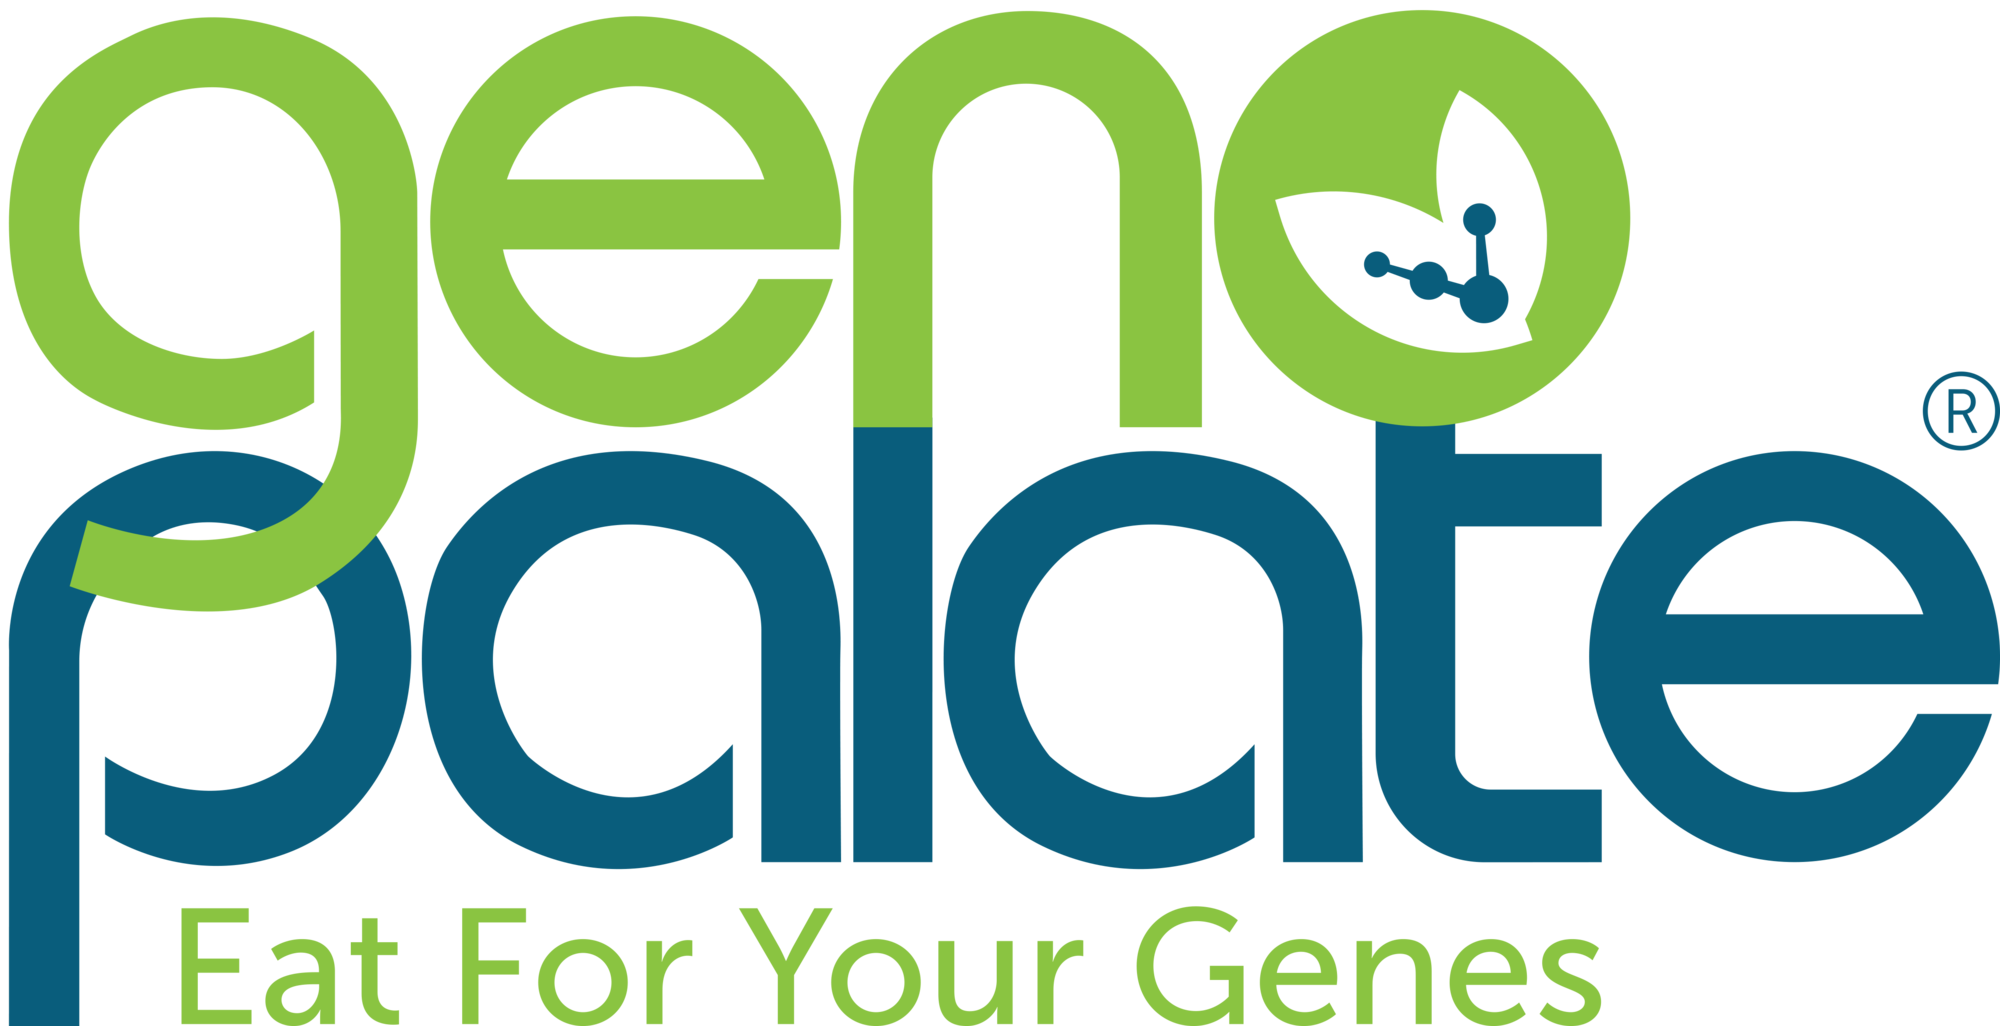 GenoPalate Releases New Telenutrition Programs Focused on Personalized Nutrition